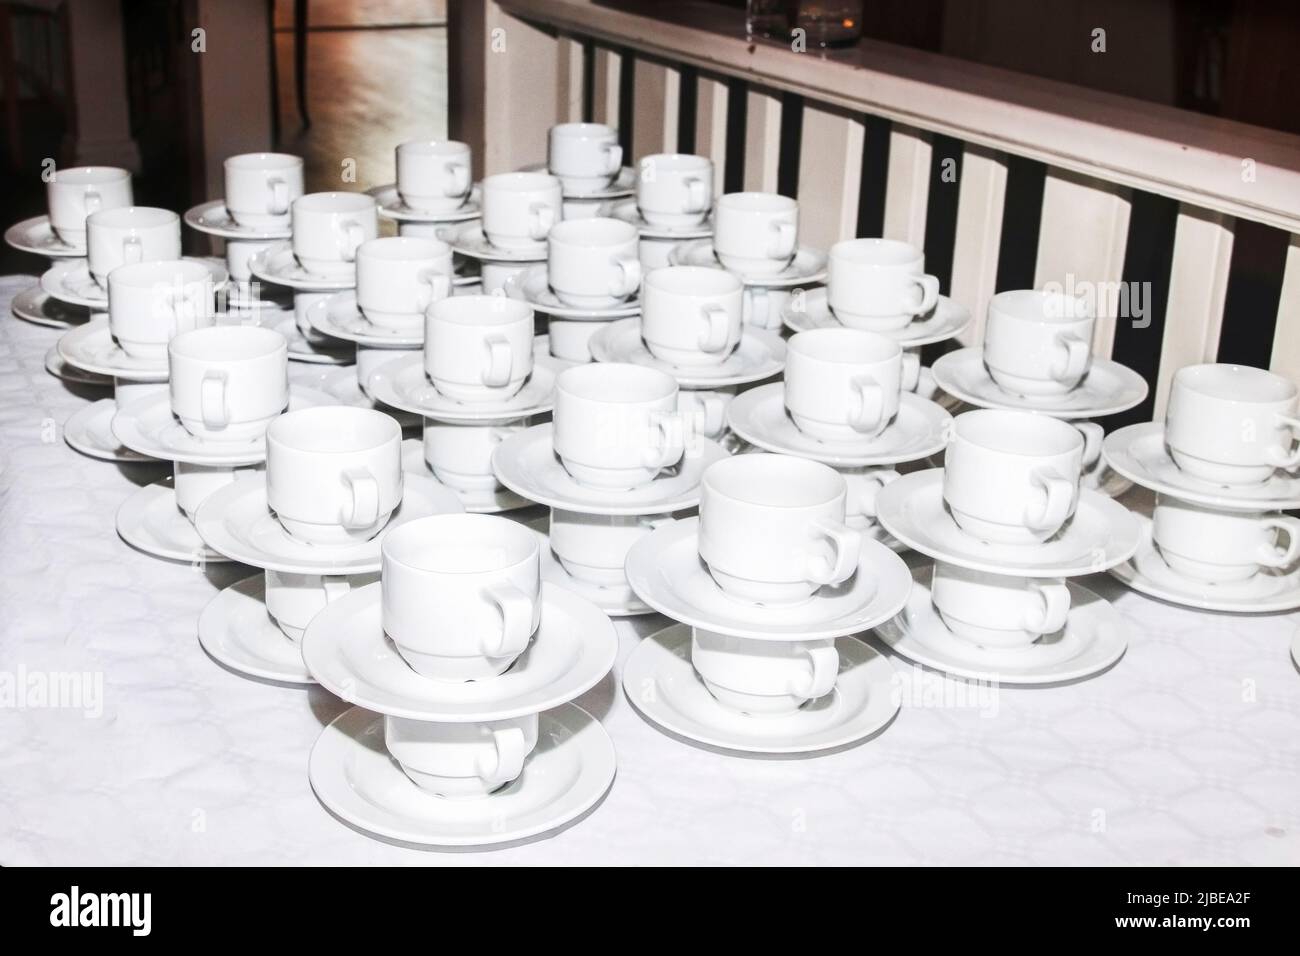 bar at an outdoor ceremony. Lots of cups and saucers on the table. pyramid of cups and saucers for the holiday. Tea cups catering and serving at a ban Stock Photo